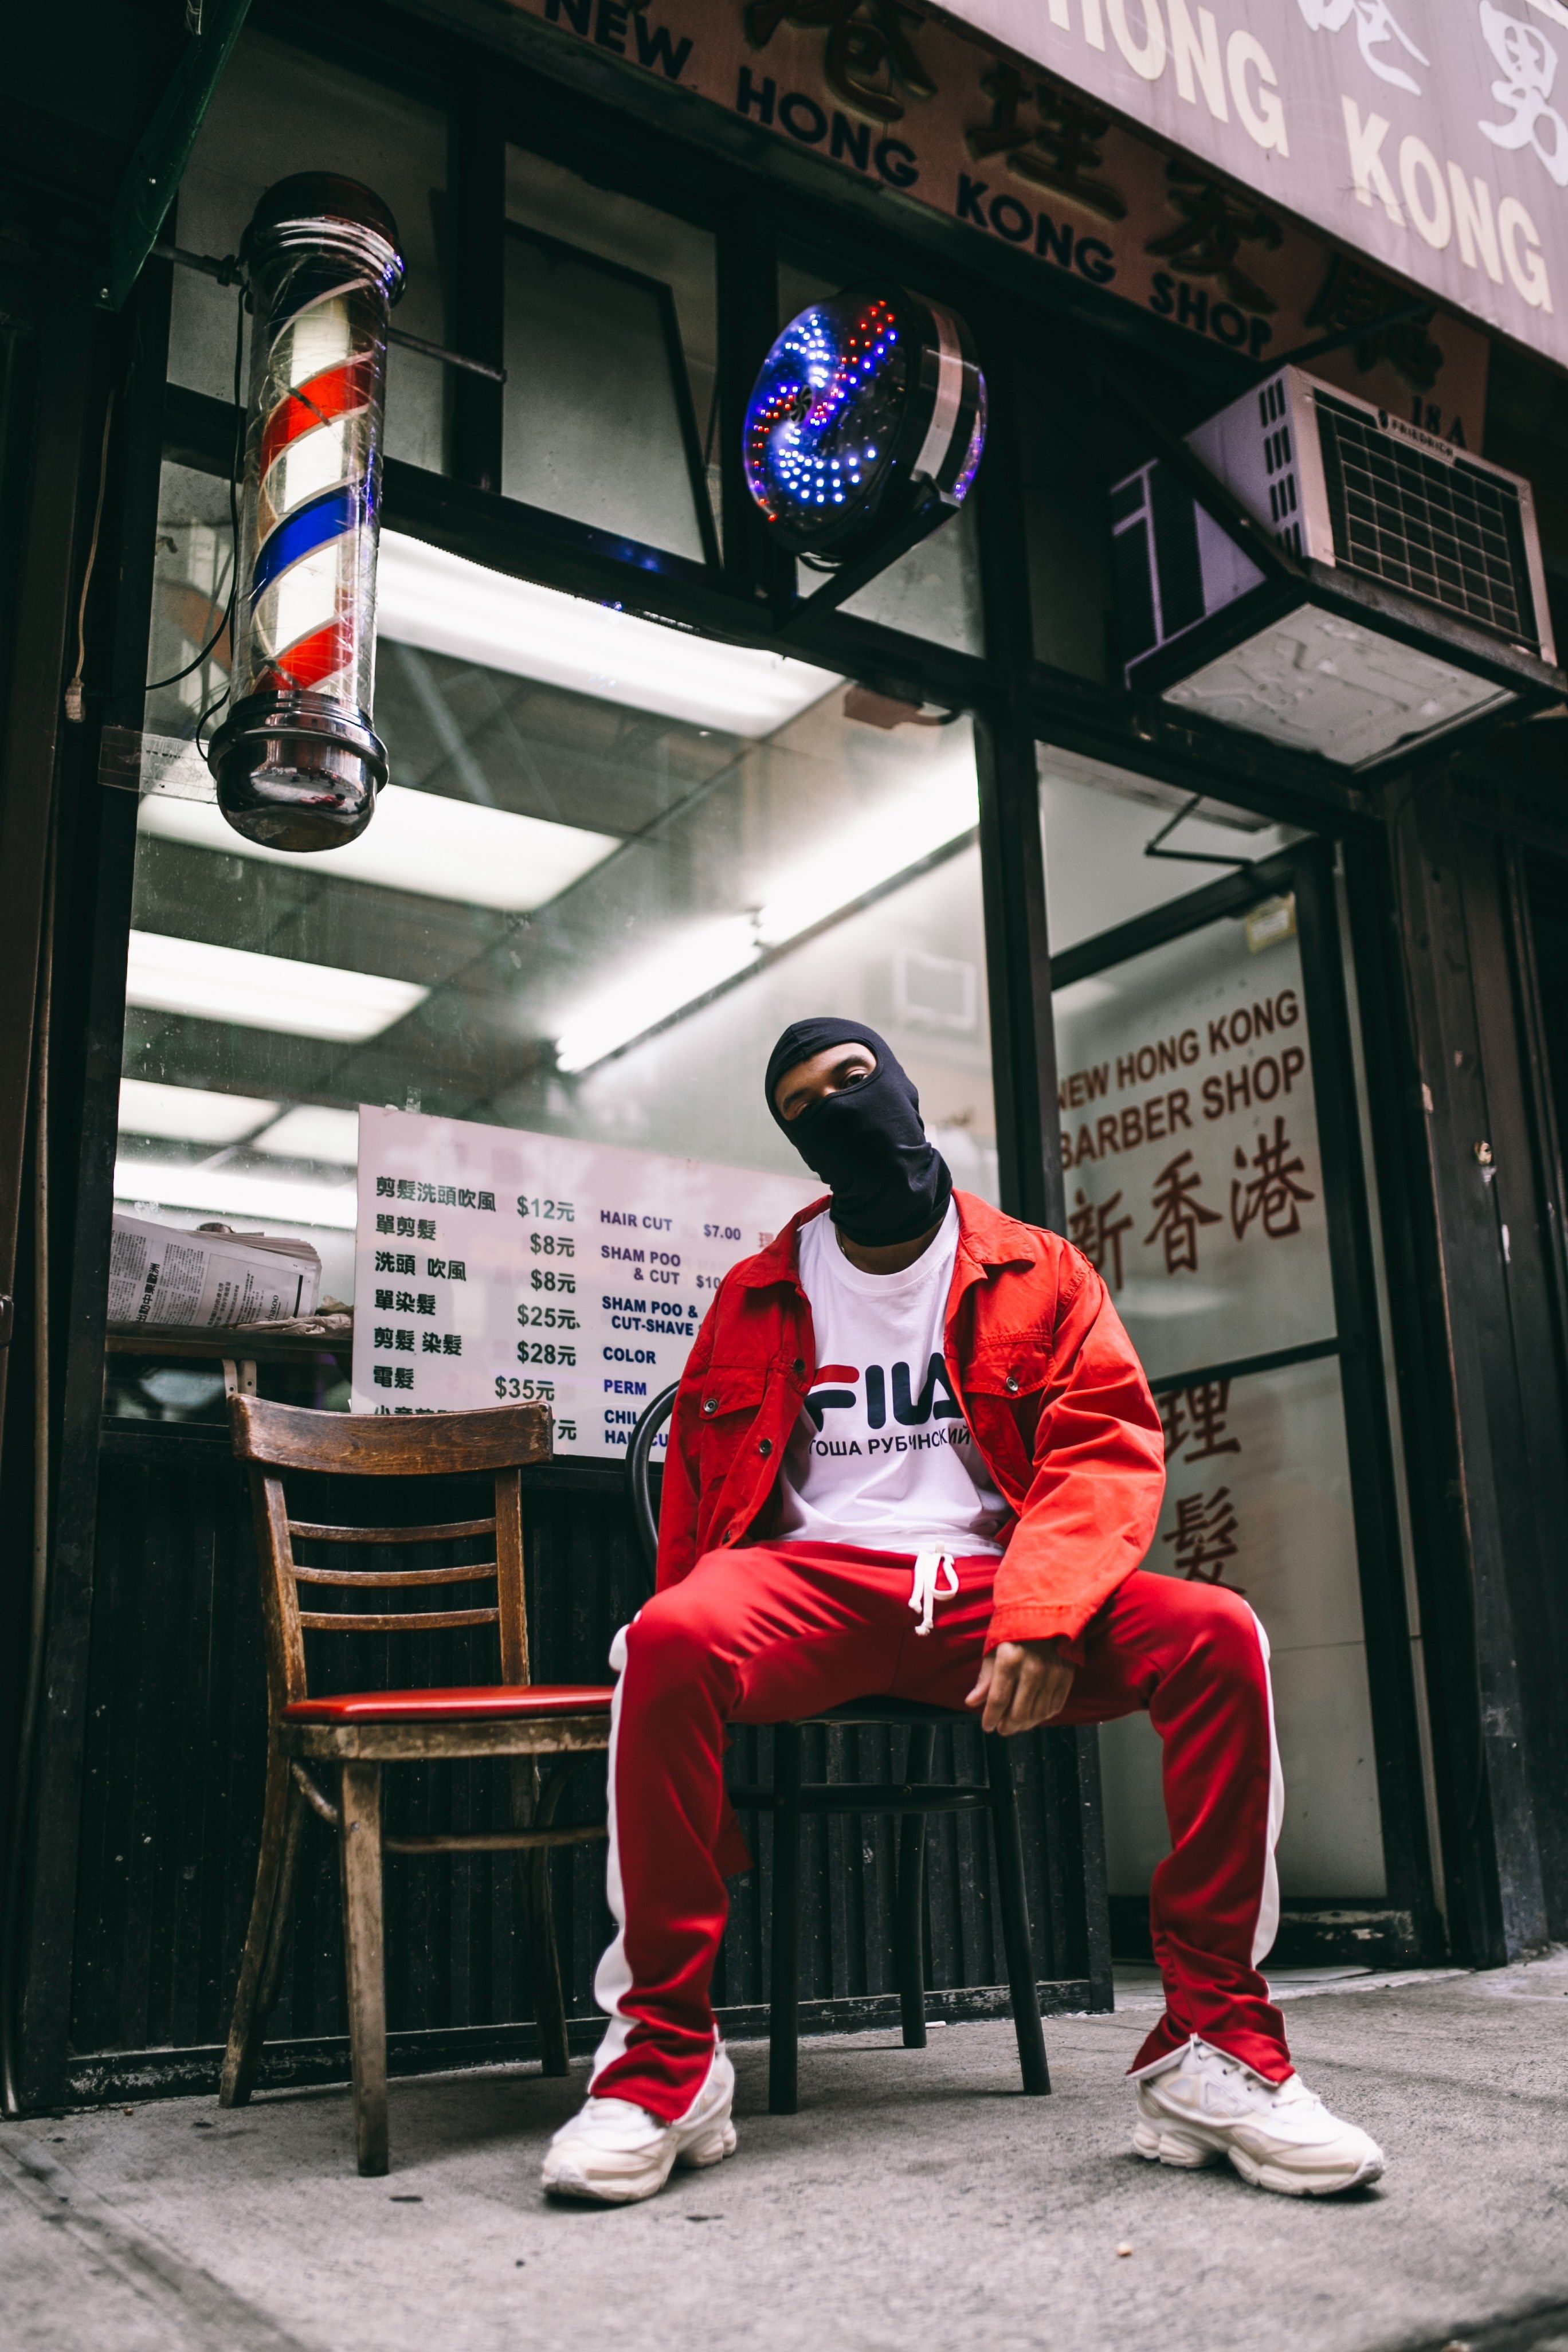 Wallpaper / a nan in a balaclava and fila sportswear sits in front of an old barbershop, _code red 4k wallpaper